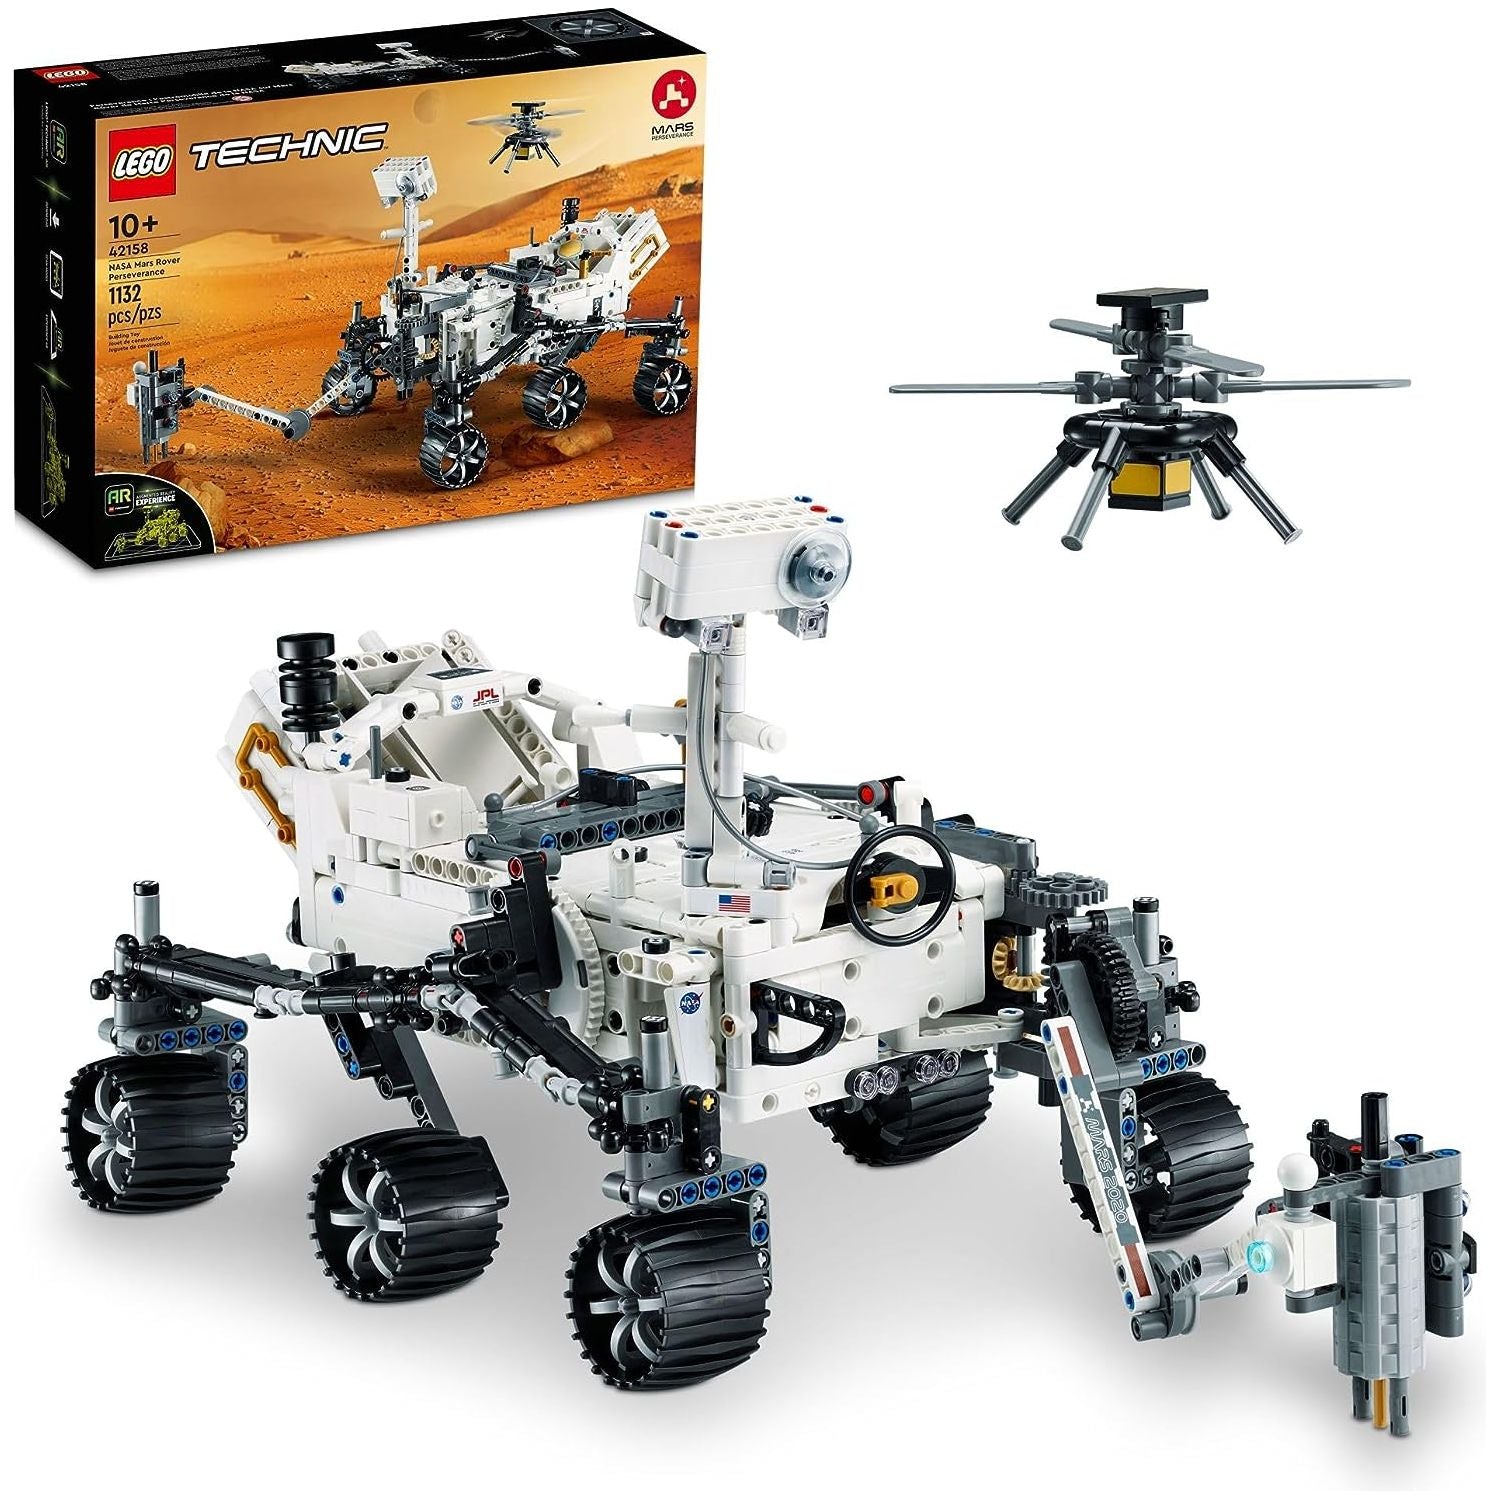 LEGO Technic NASA Mars Rover Perseverance 42158 Advanced Building Kit for Kids Ages 10 and Up, NASA Toy with Replica Ingenuity Helicopter